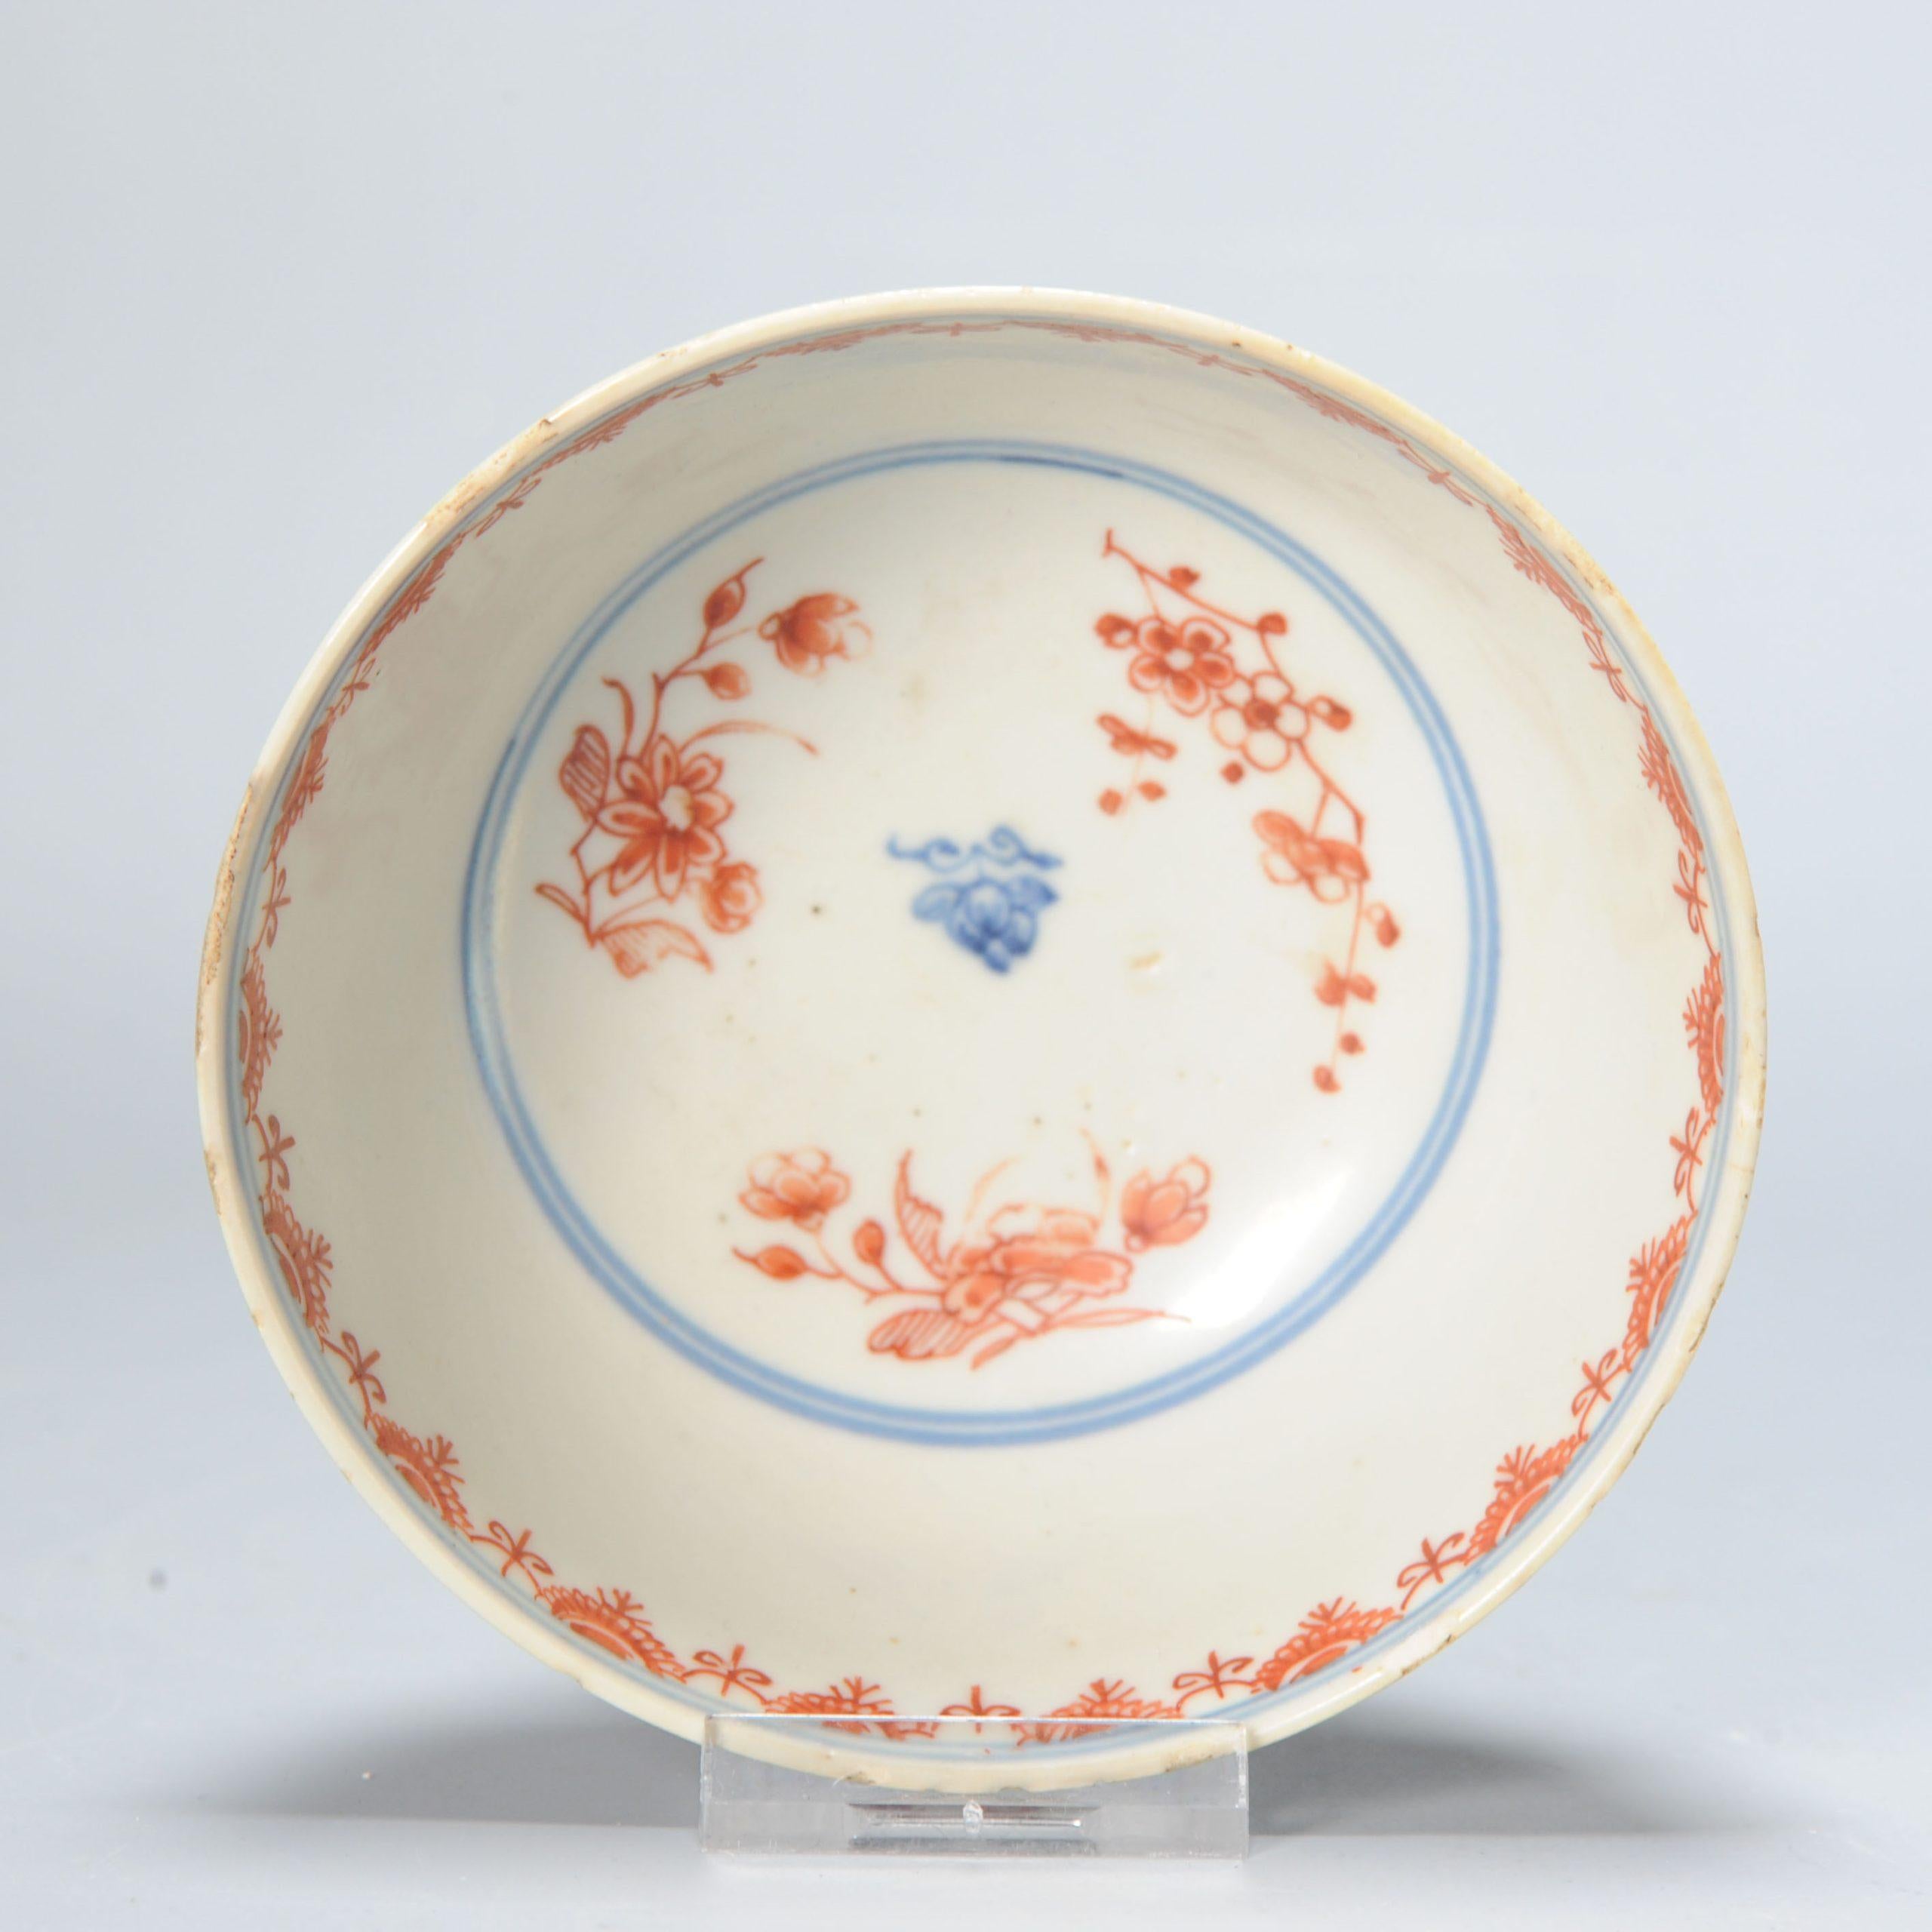 A very nicely made 18th century Kangxi Amsterdam Bont porcelain bowl. Marked at the base.

We take a look at Amsterdams Bont porcelain from China. A relatively unknown niche of Chinese porcelain from ca 1680-1740 that was partly decorated in Europe.